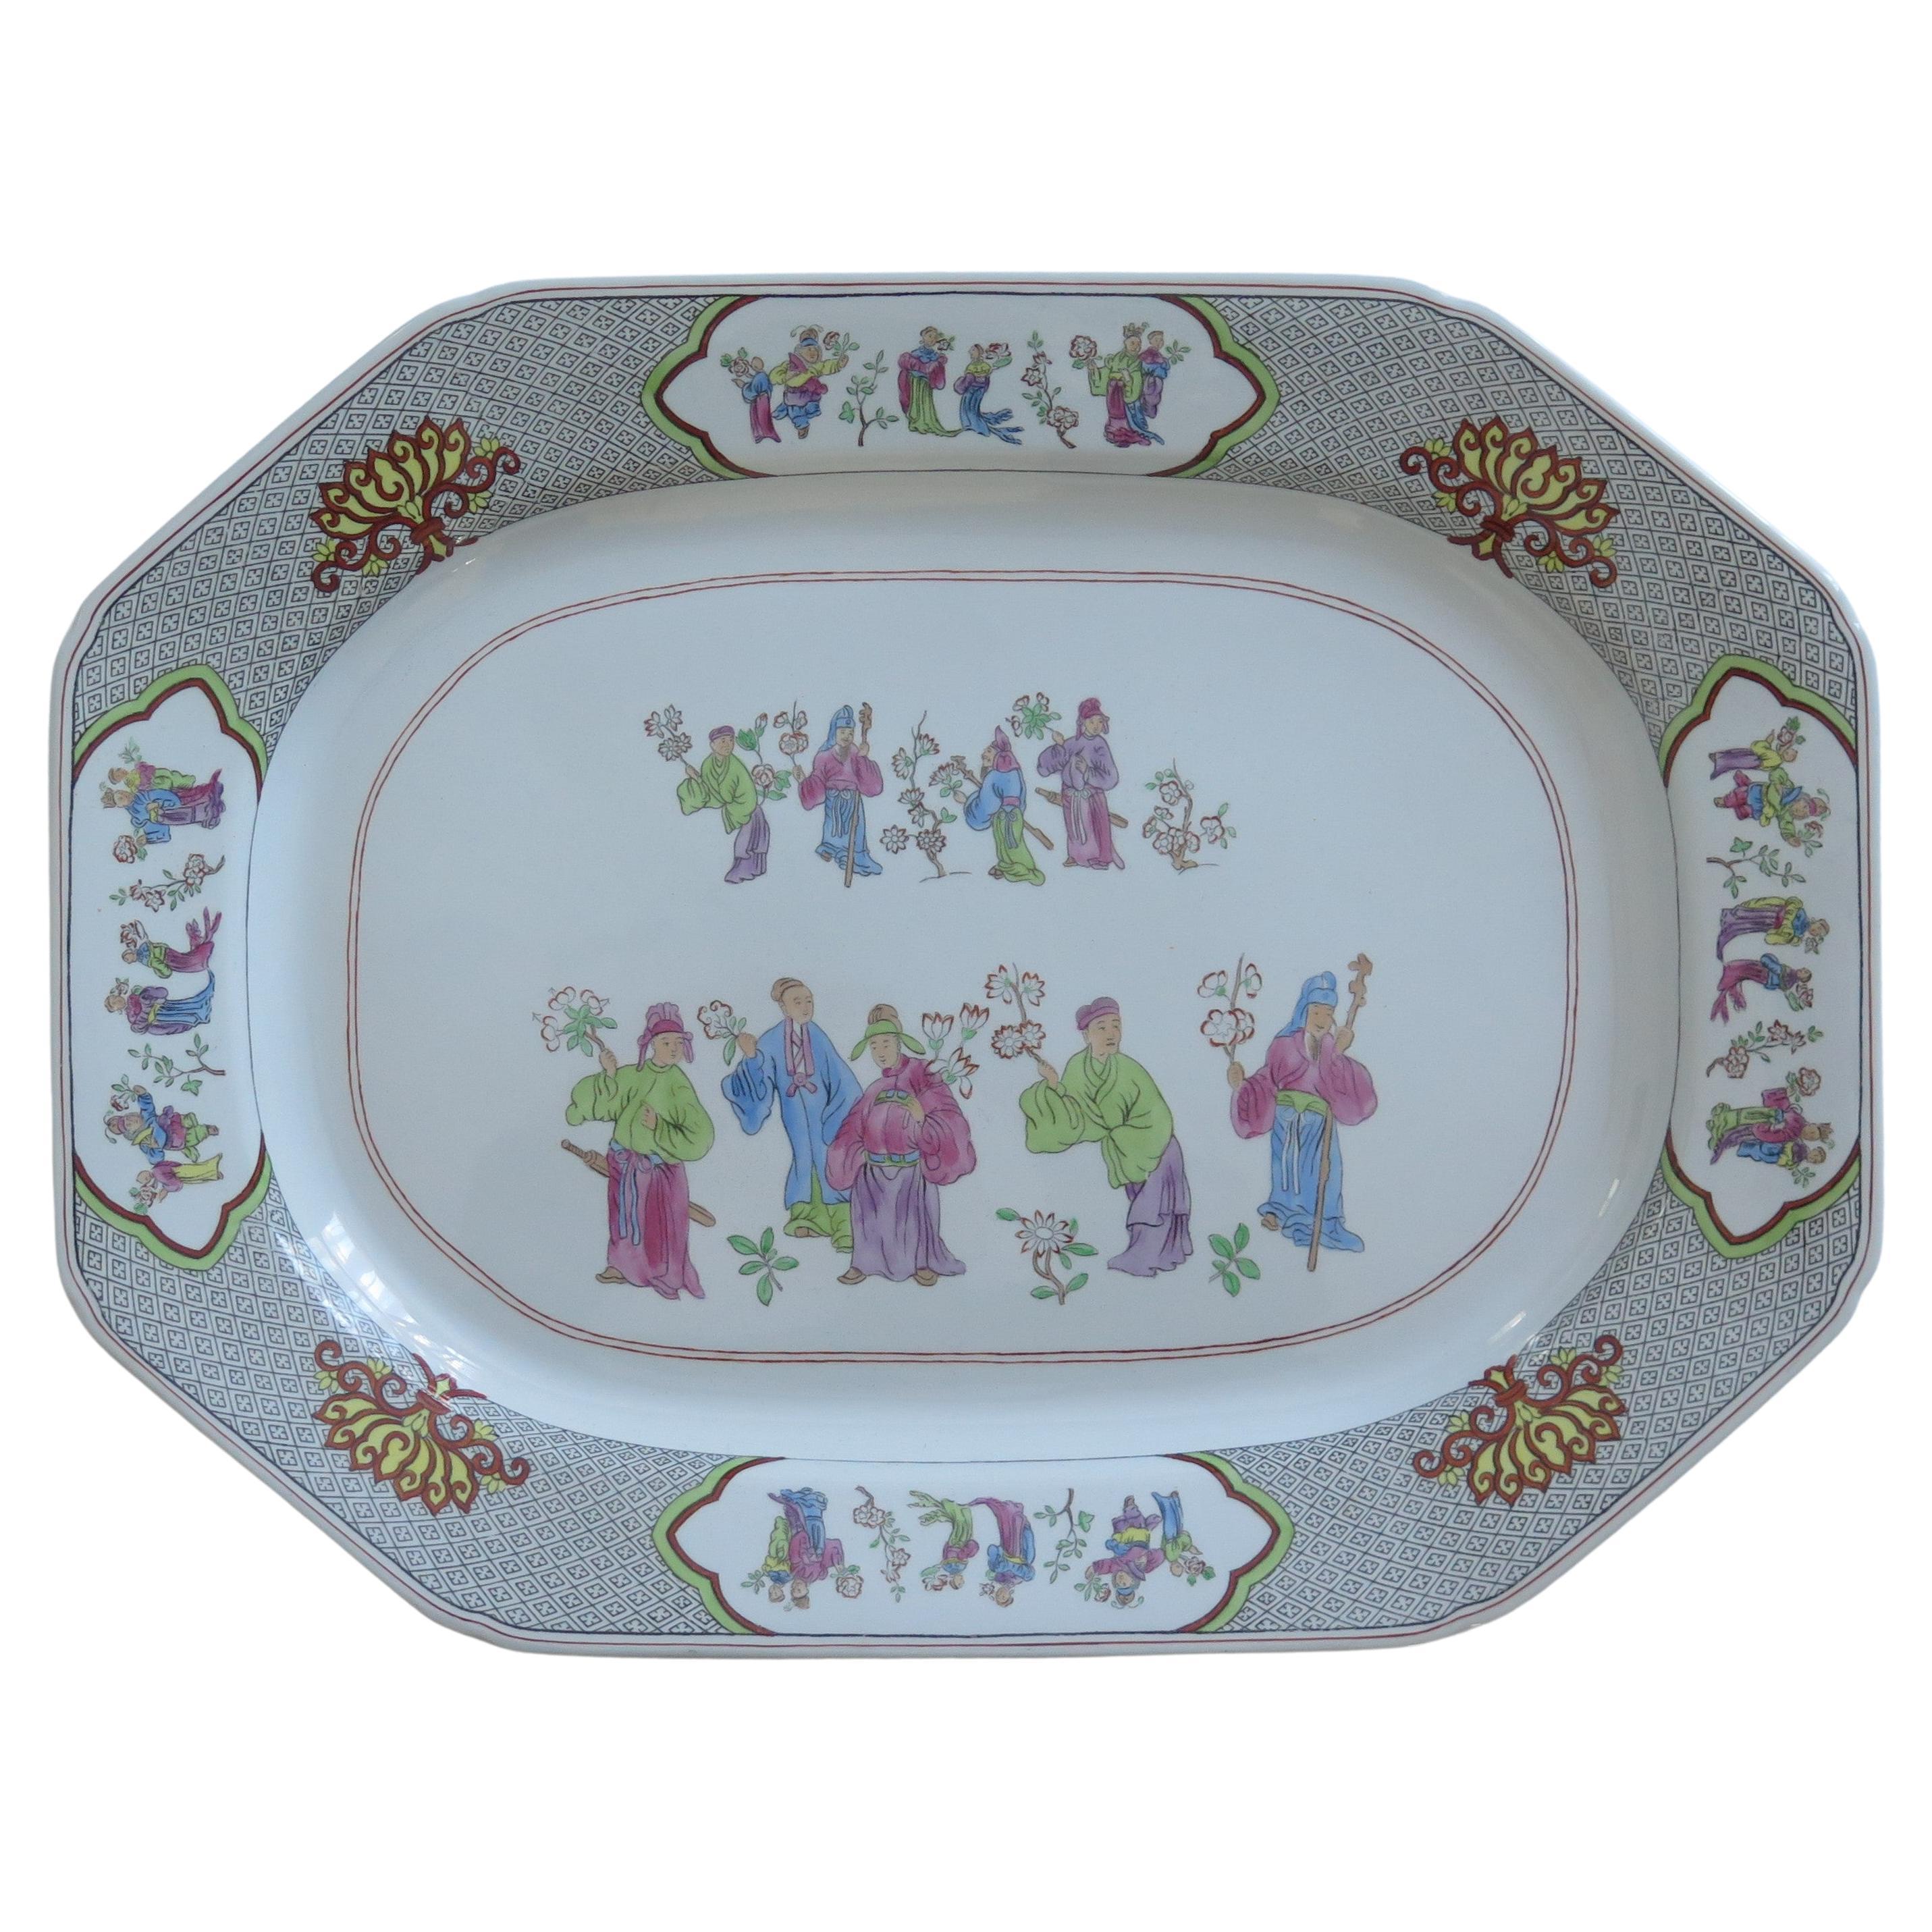 Copeland-Spode Large Ironstone Platter in Chinese Figures pattern, Ca 1900